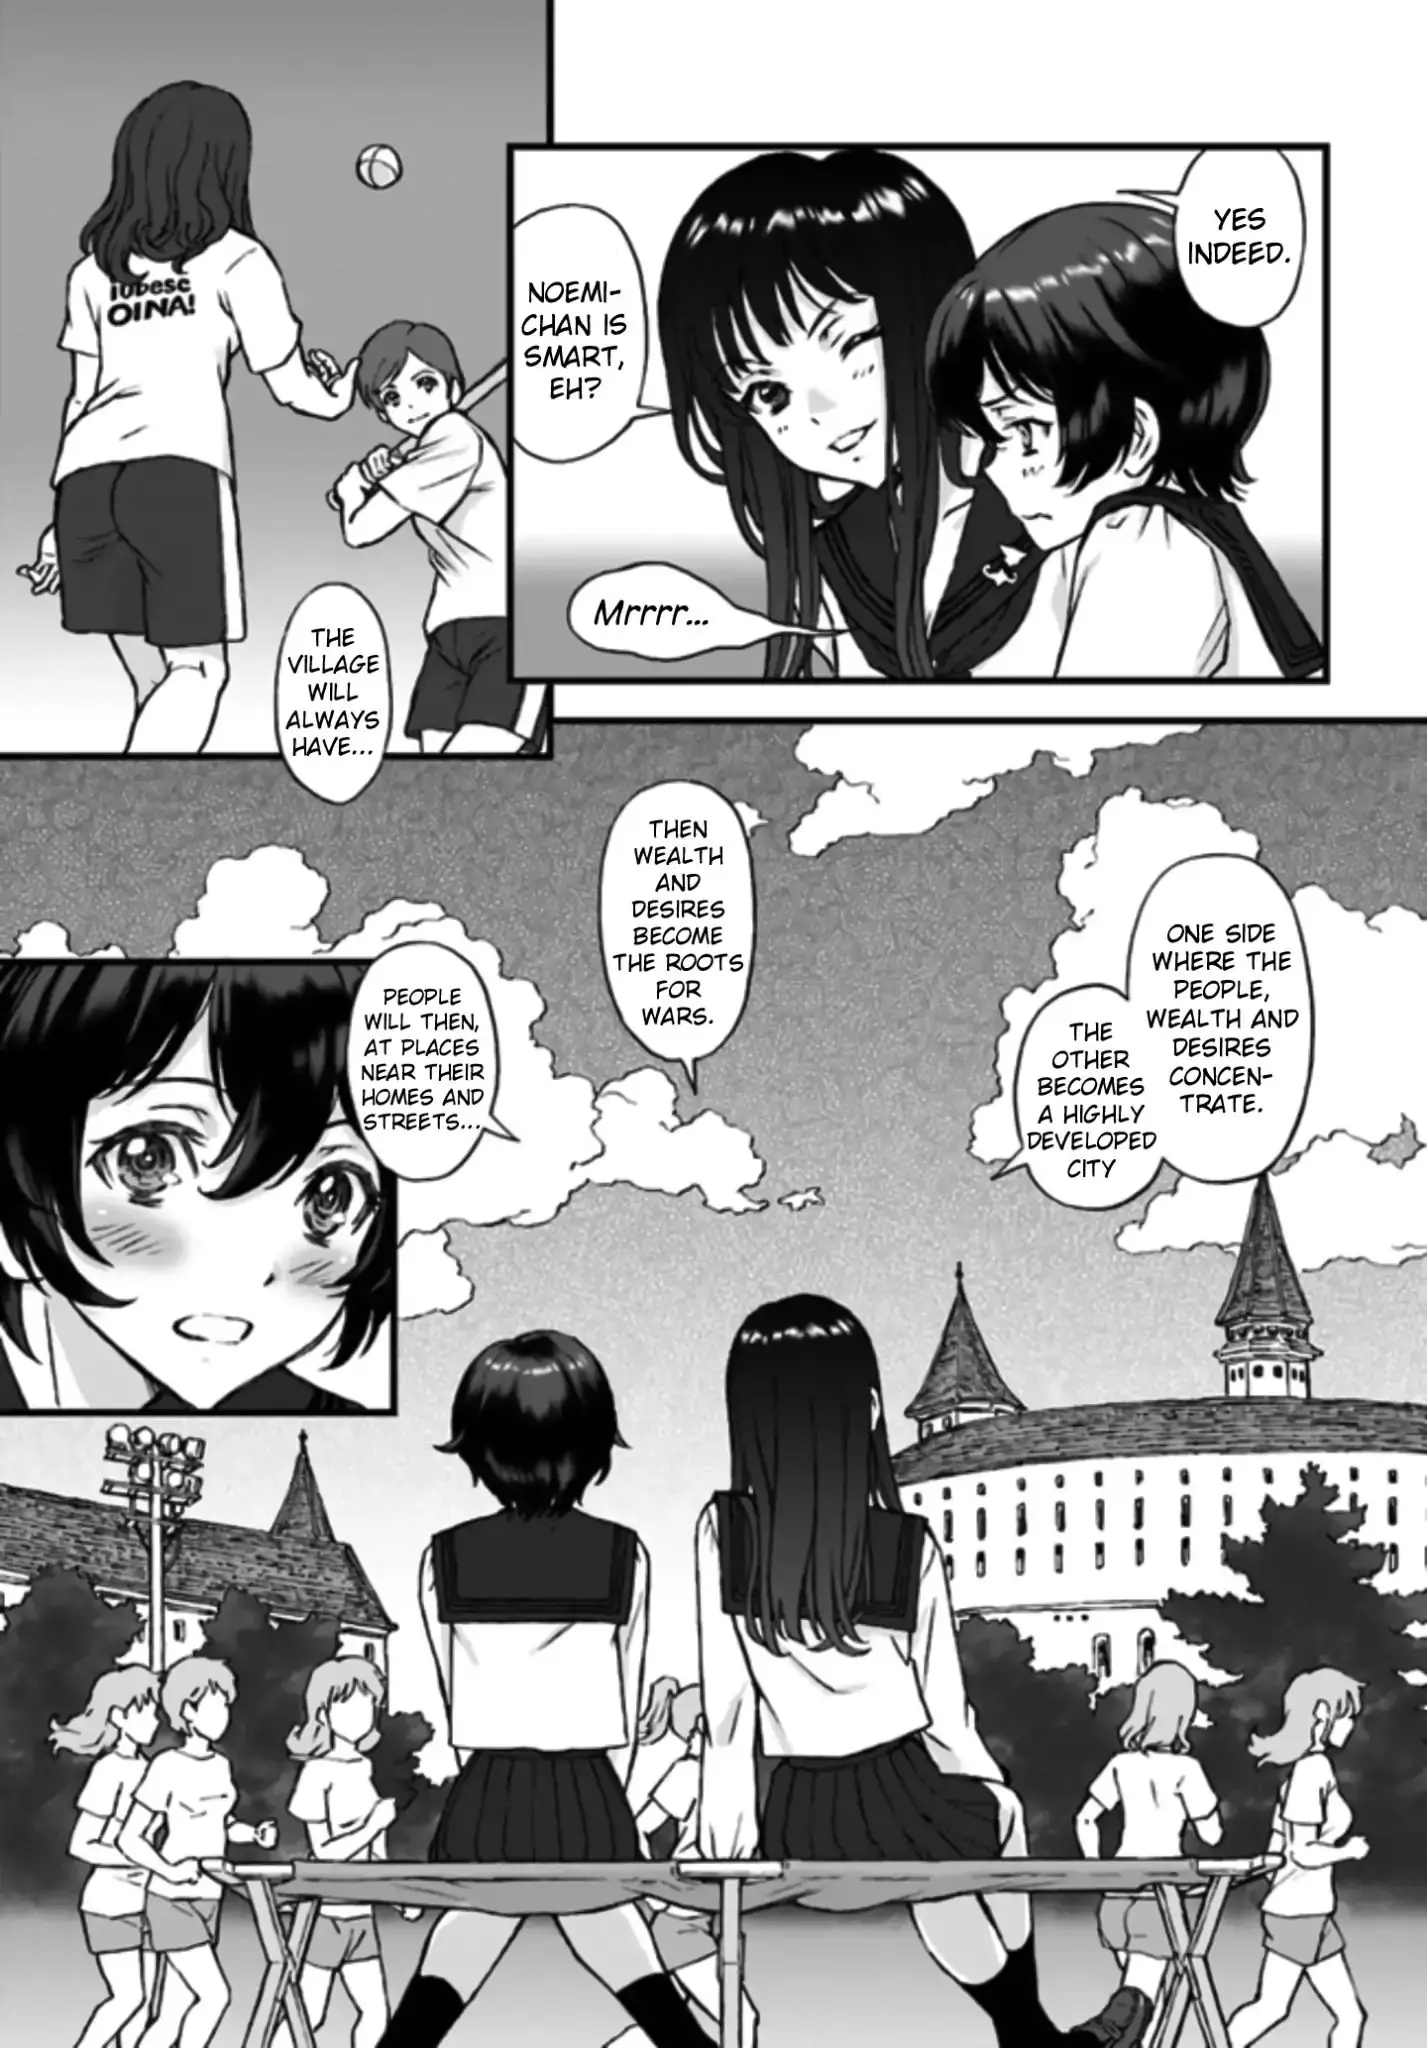 Girls Und Panzer - The Fir Tree And The Iron-Winged Witch - 1 page 2